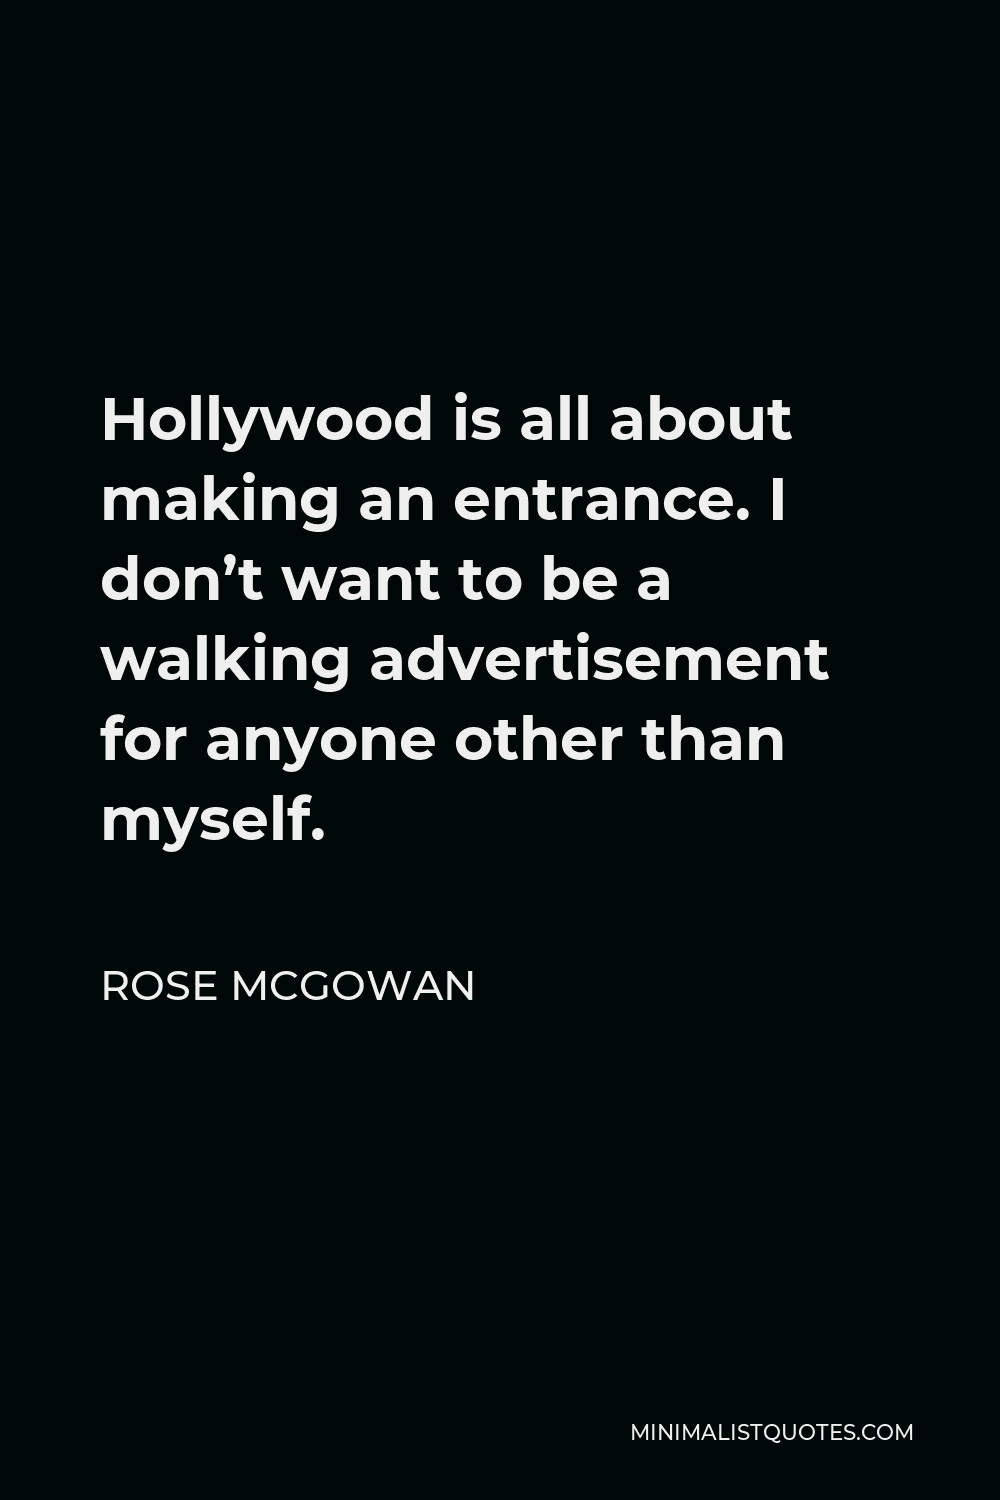 Rose McGowan Quote - Hollywood is all about making an entrance. I don’t want to be a walking advertisement for anyone other than myself.